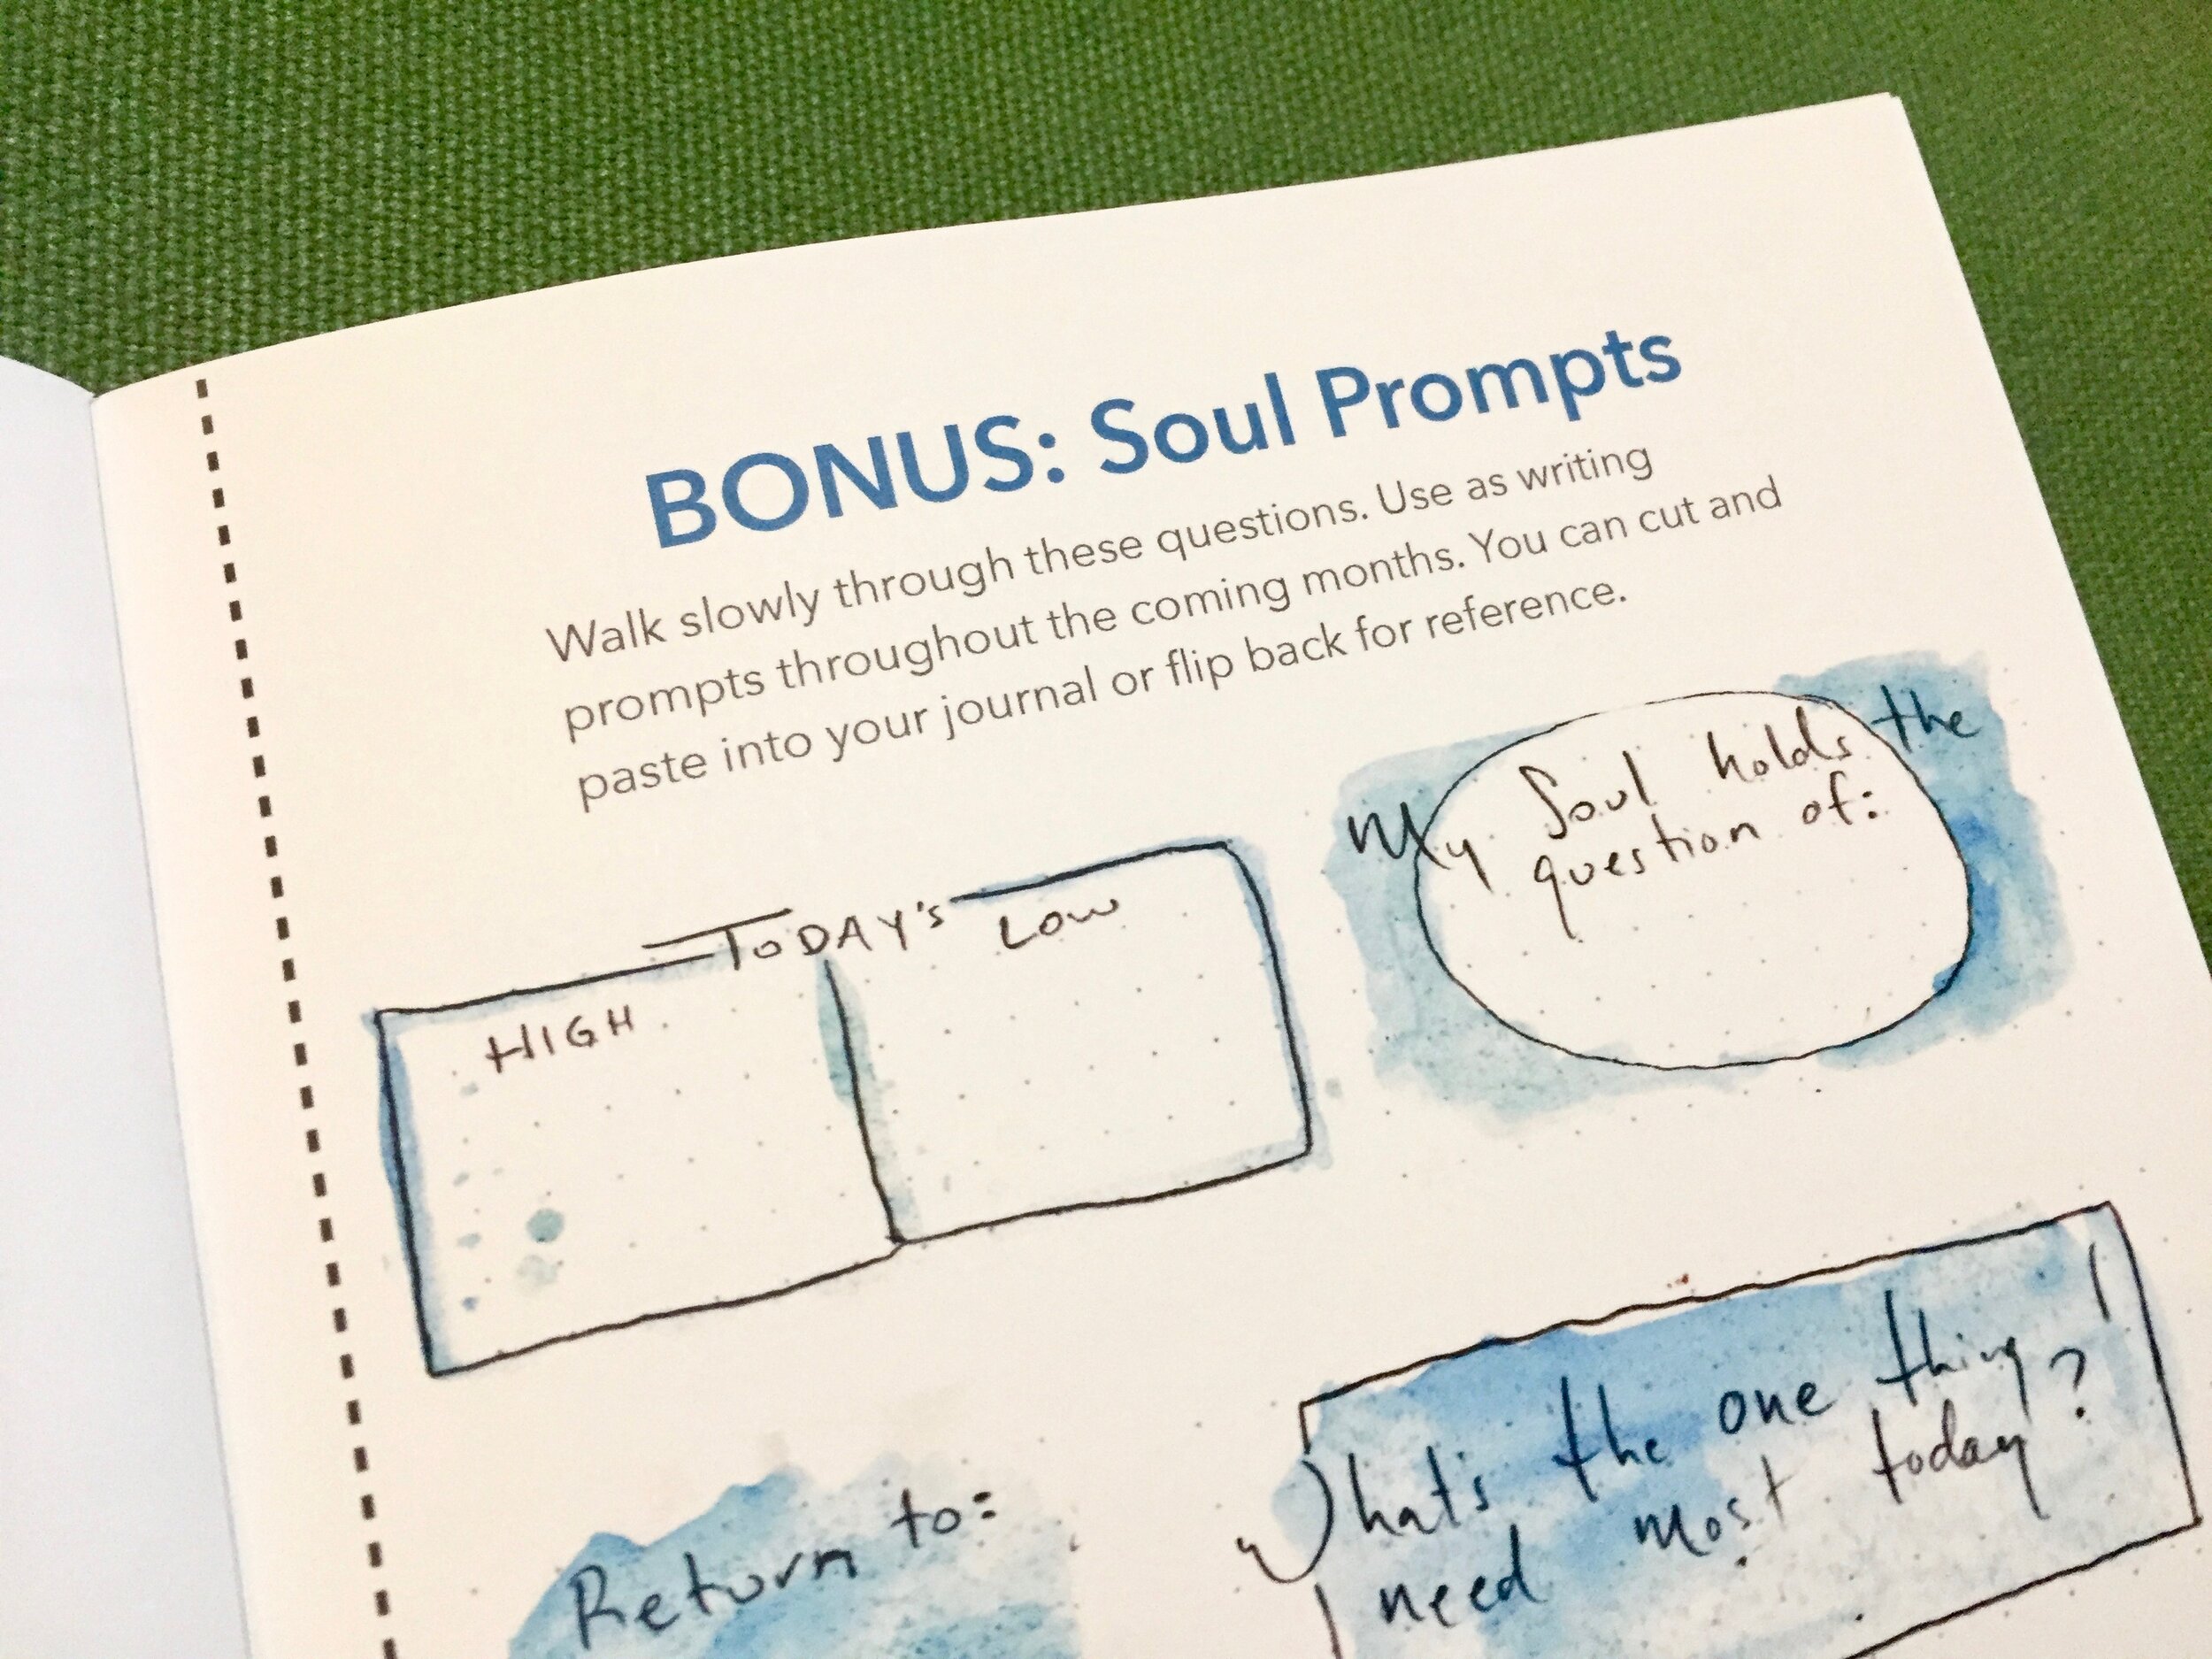 Prompts in Issue 2